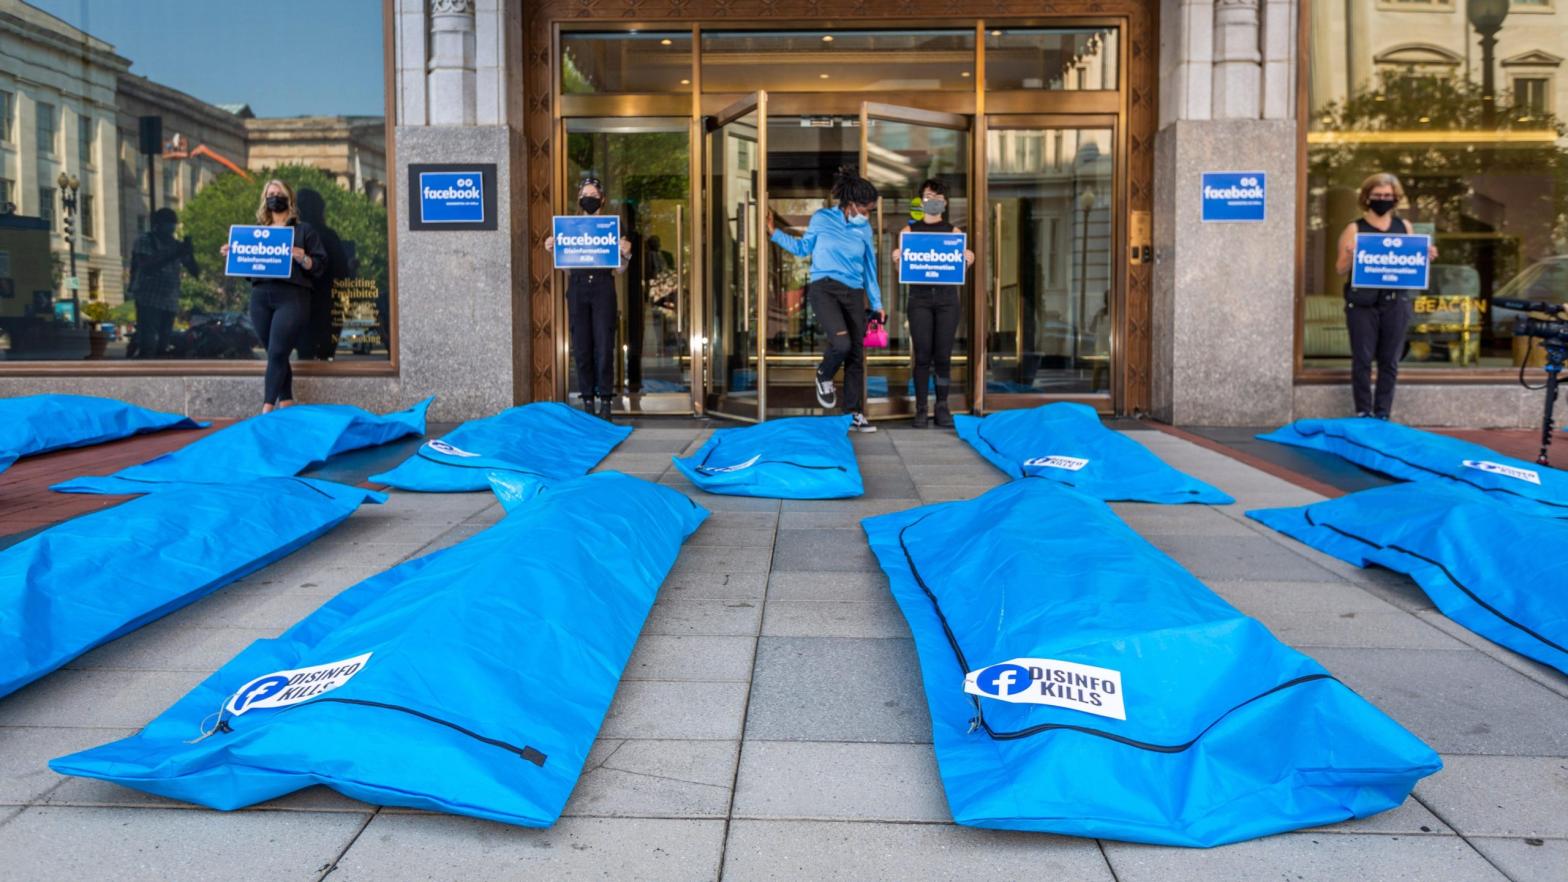 Photo: At Washington, DC Facebook headquarters, activists (the Real Facebook Oversight Board) lay body bags and call for Facebook to stop disinformation that leads to Covid deaths  on Wednesday, July. 28, 2021 in Washington. (Eric Kayne/AP Images for All the Citizens Ltd.), AP